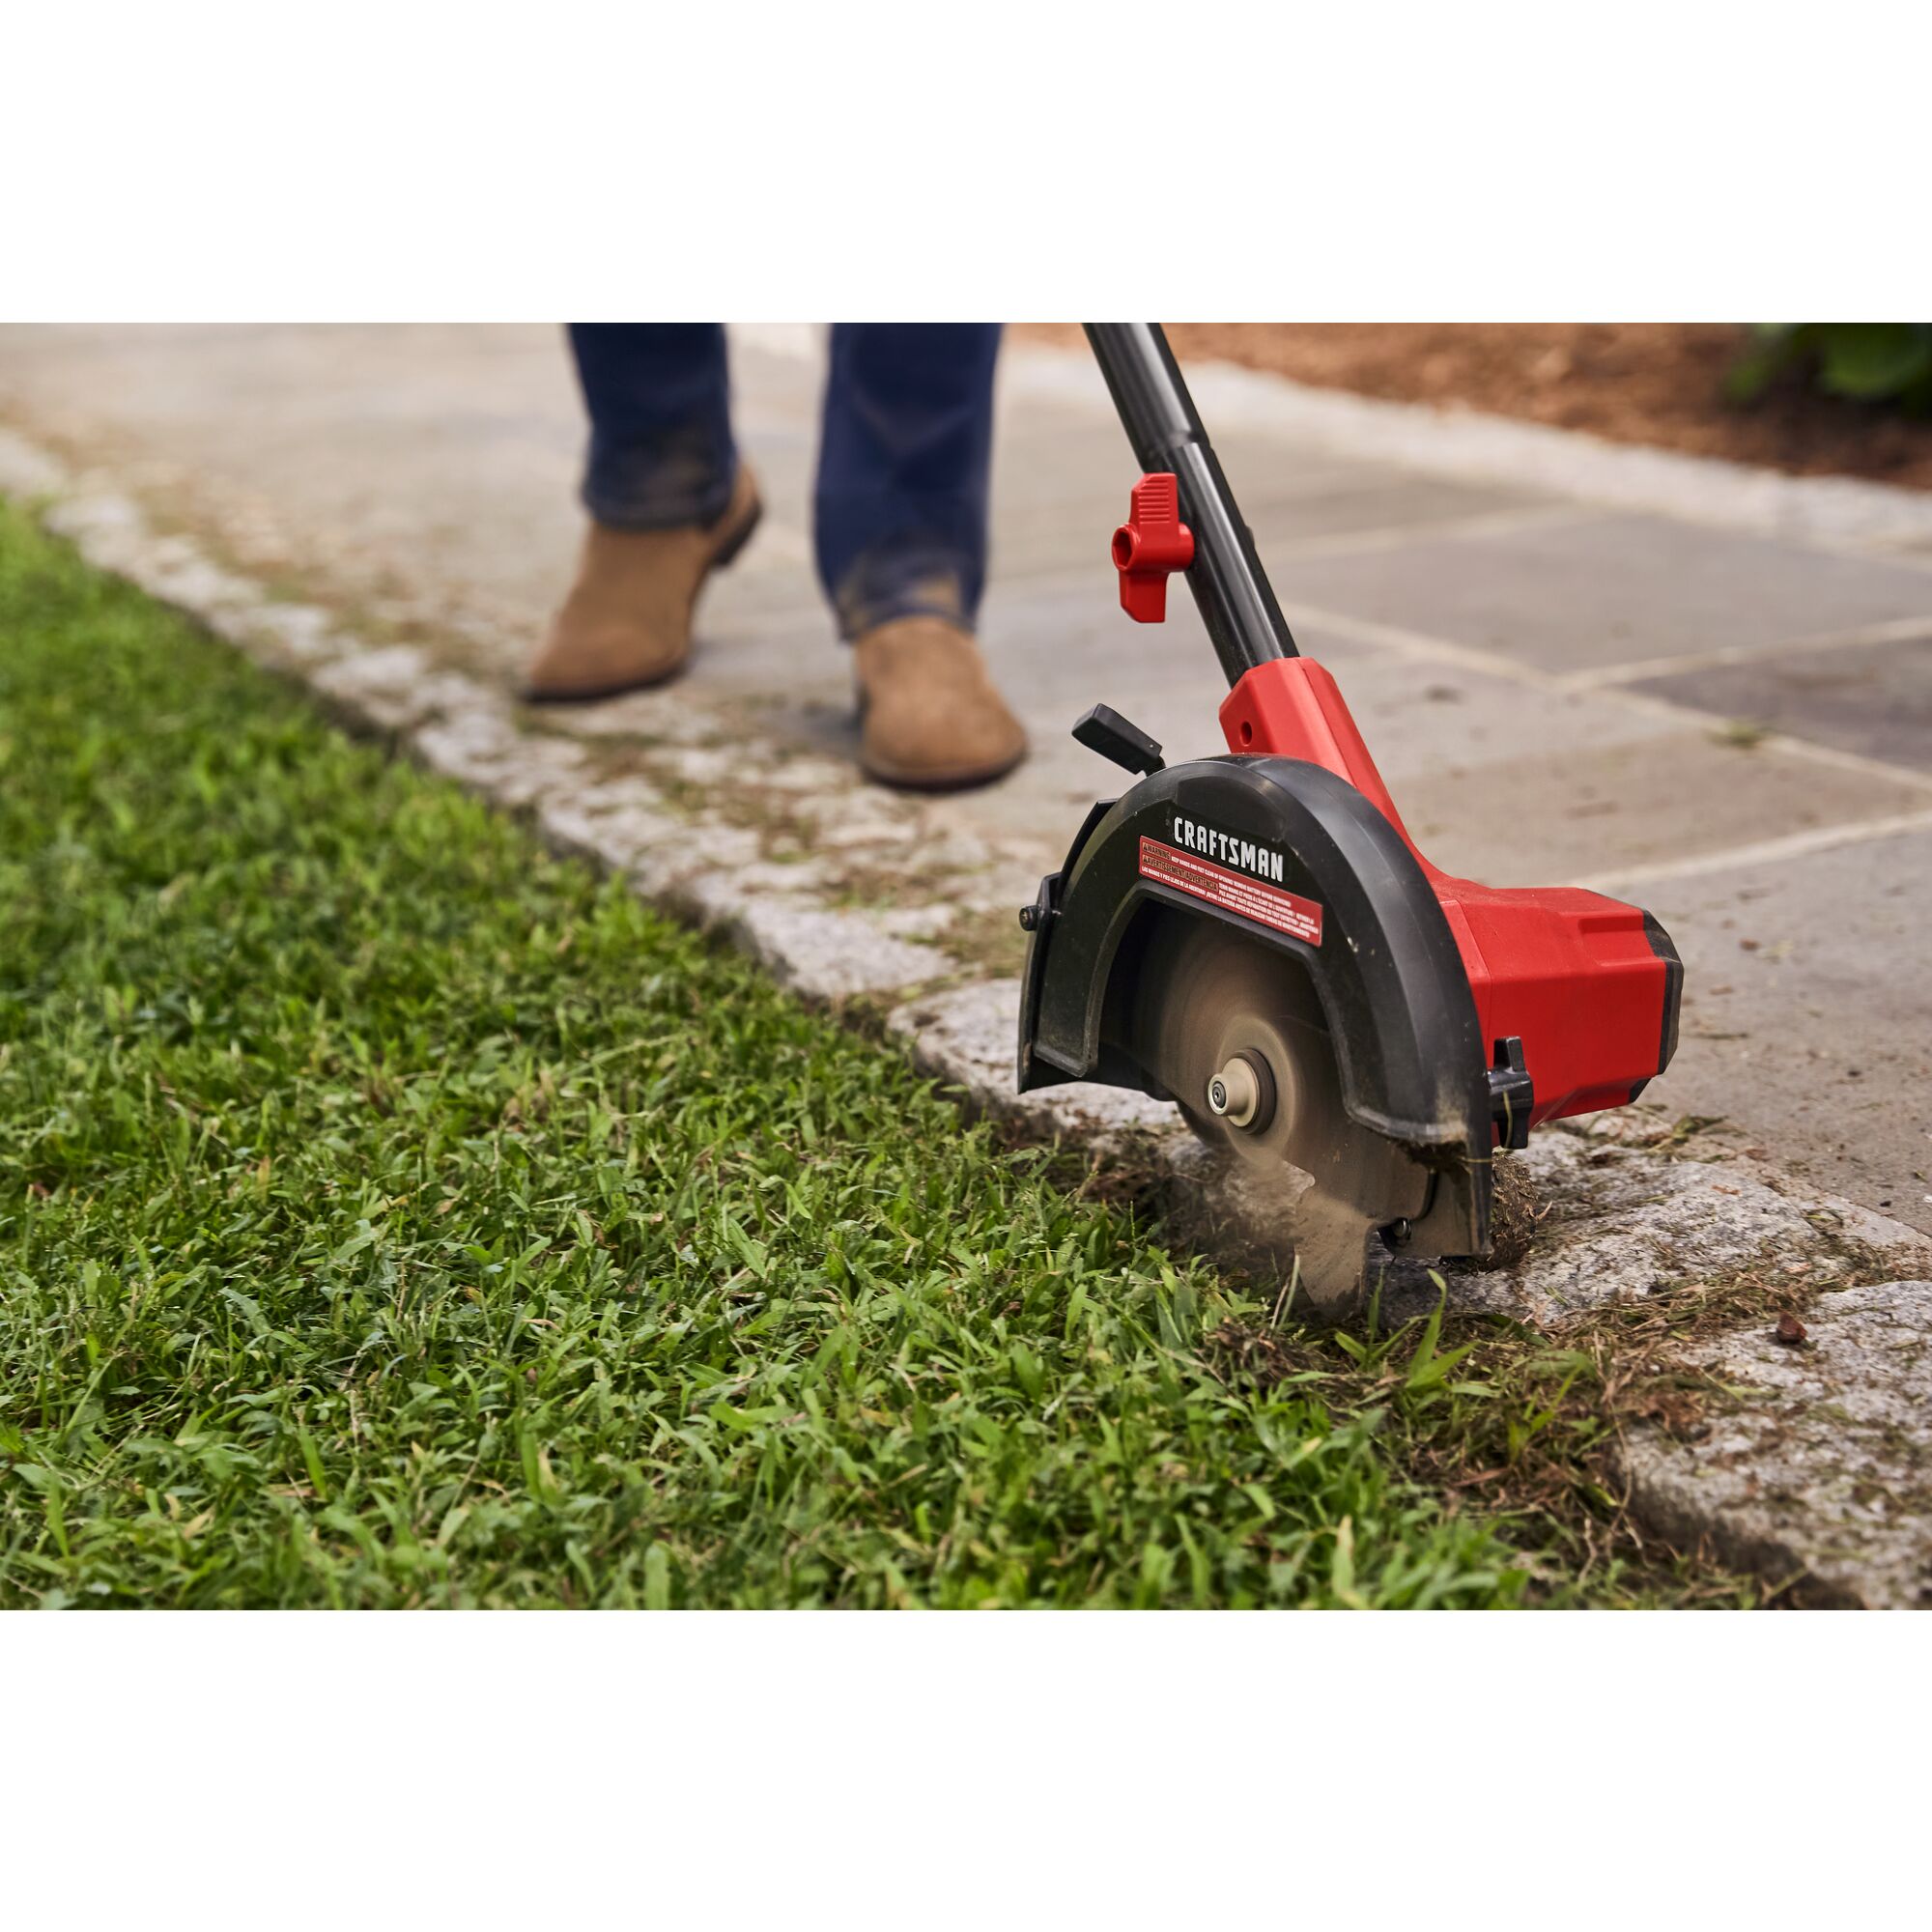 Seamless mobility feature of cordless edger kit.